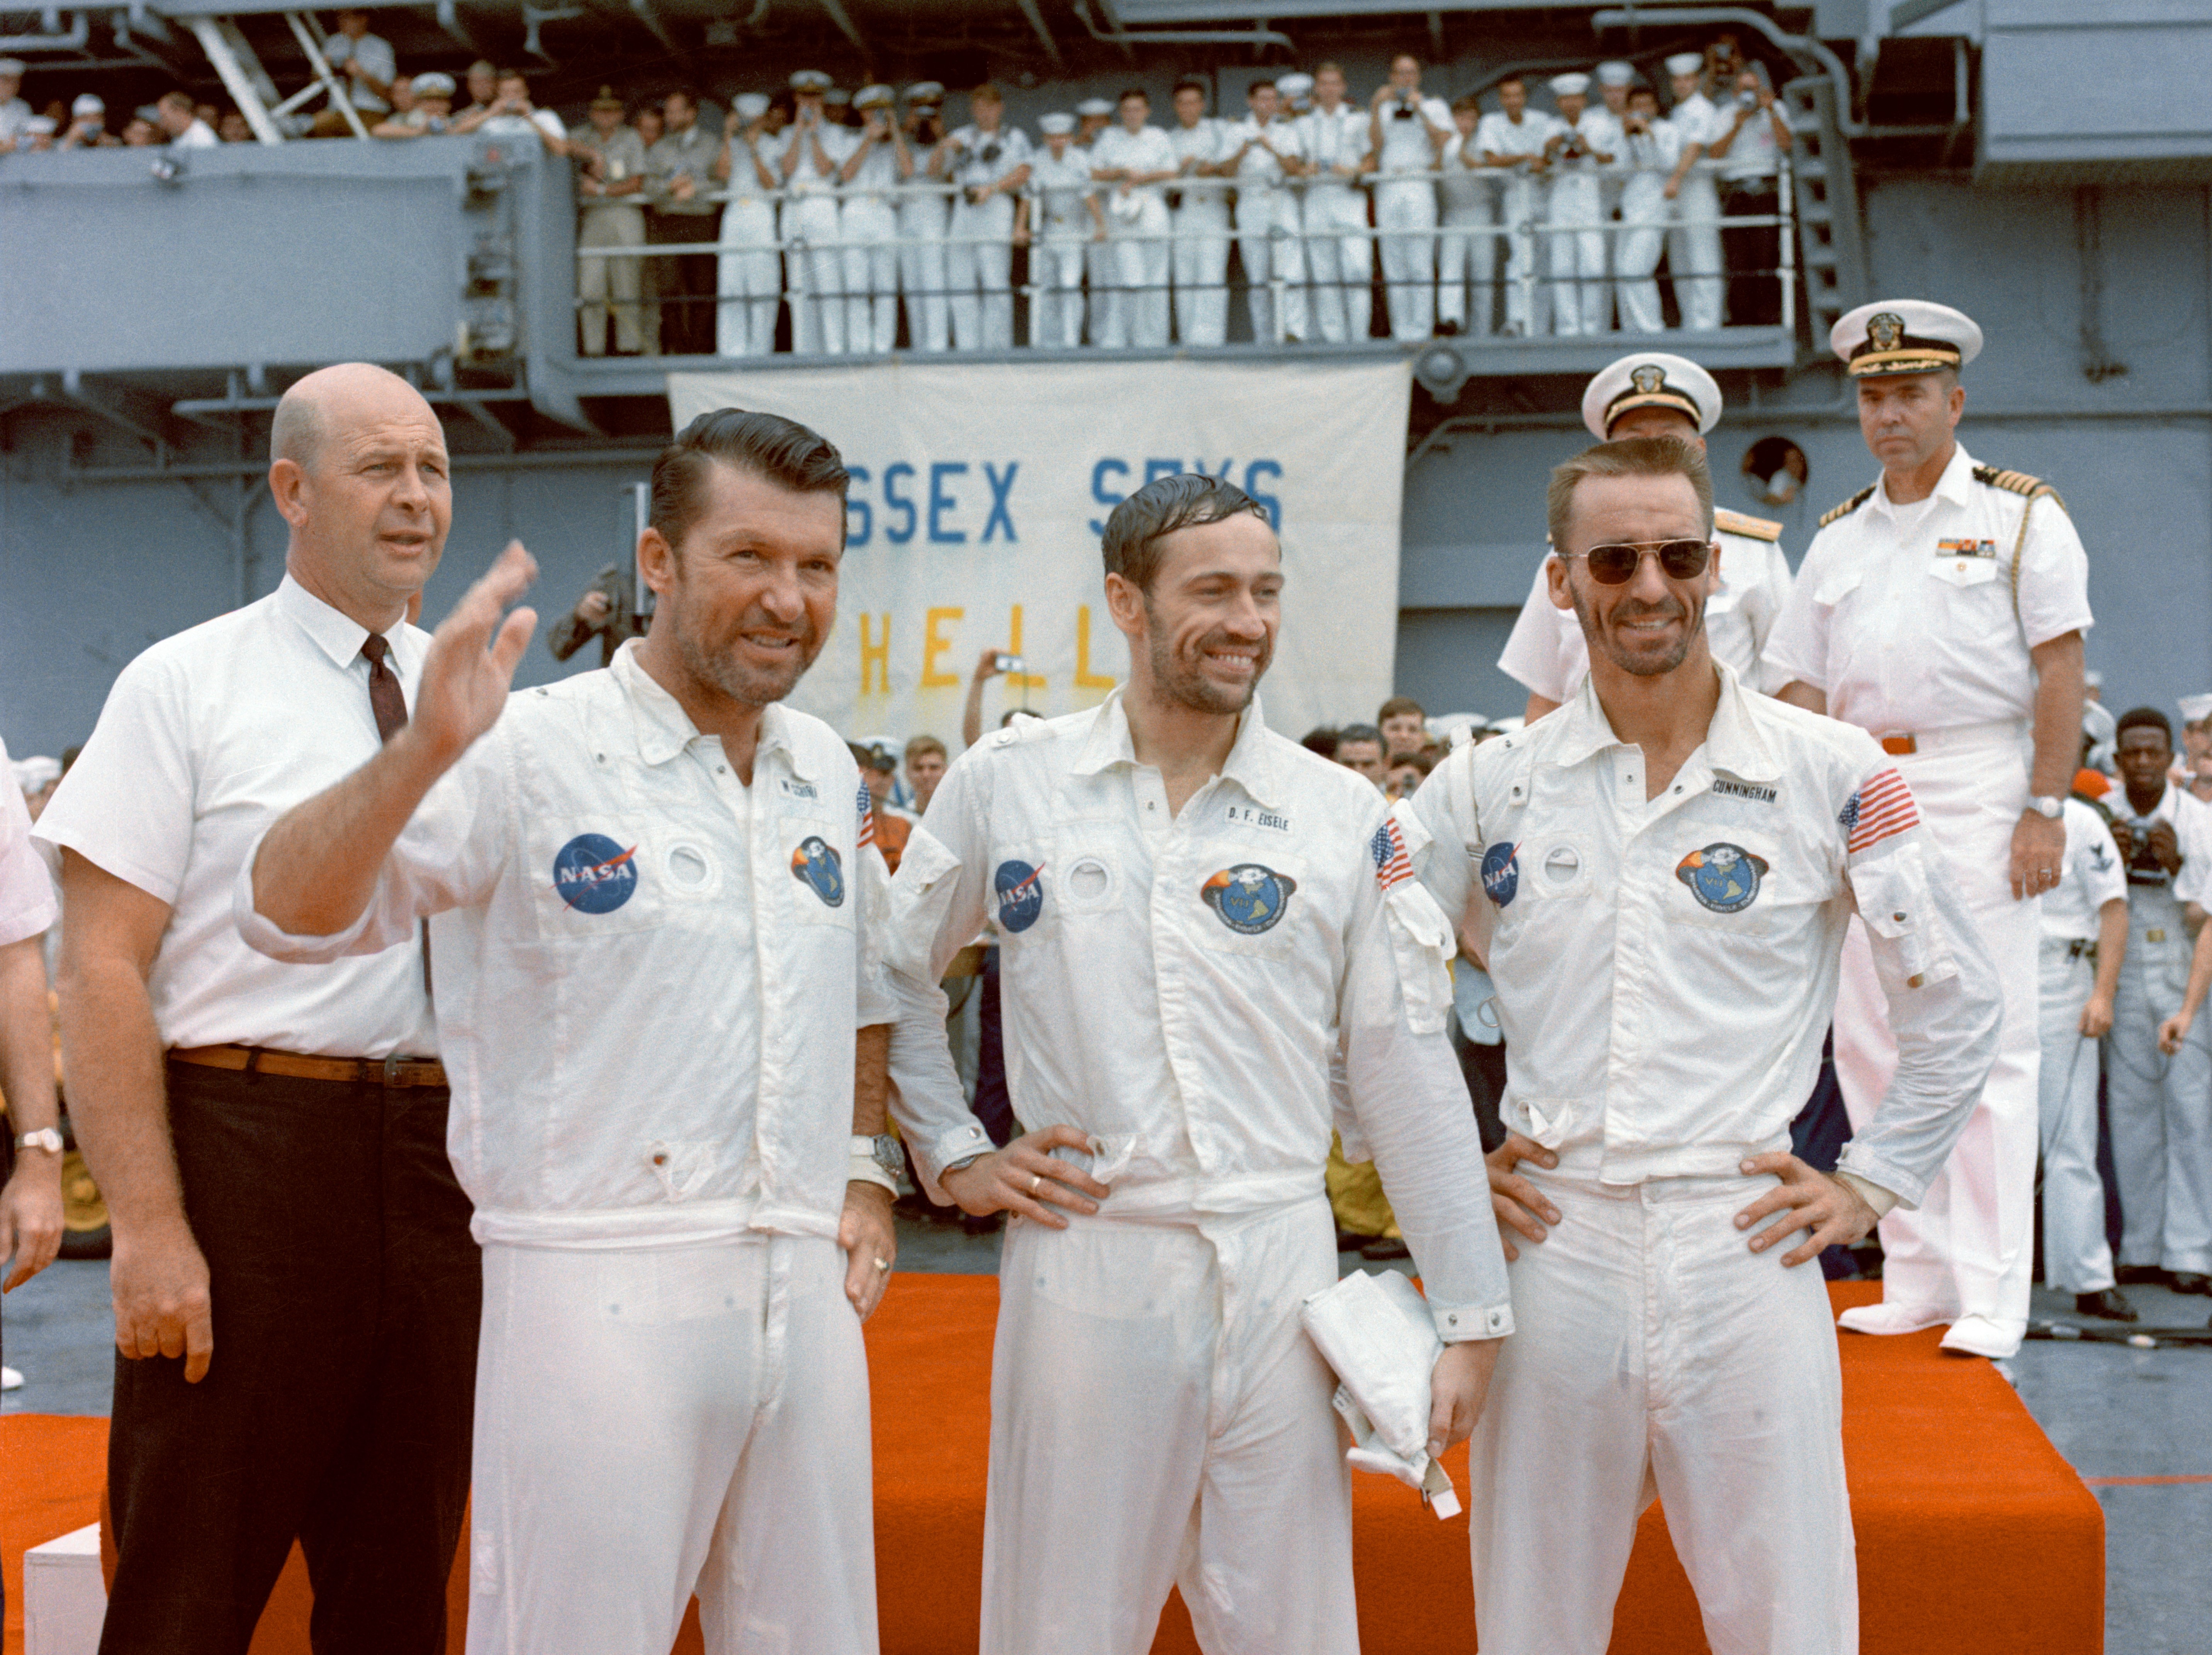 Apollo 7 astronauts Walter M. Schirra, left, Donn F. Eisele, and R. Walter Cunningham on the recovery ship USS Essex following their 11-day mission